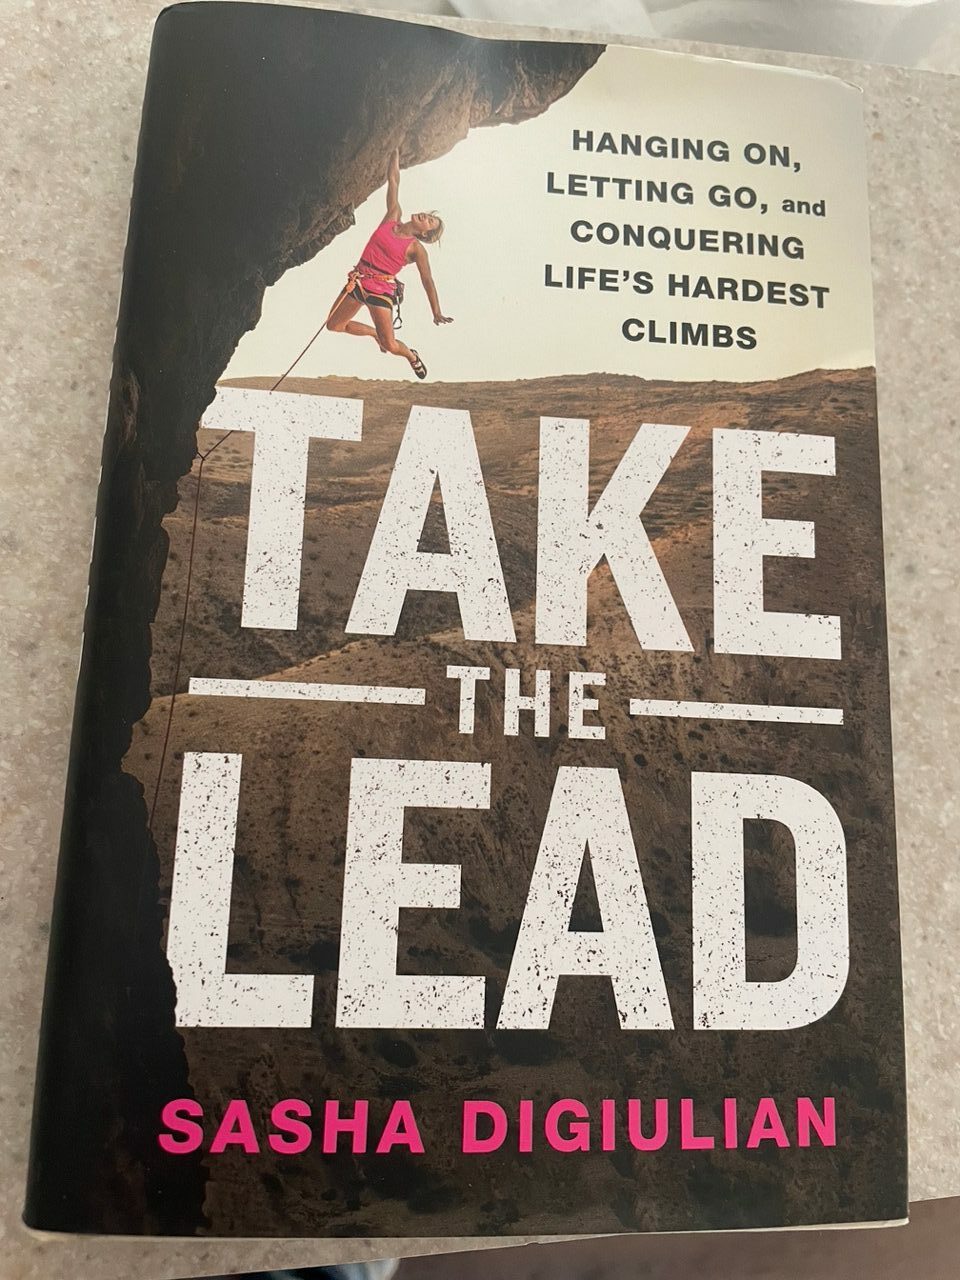 Take the Lead: Hanging on, Letting Go, and Conquering Life's Hardest Climbs